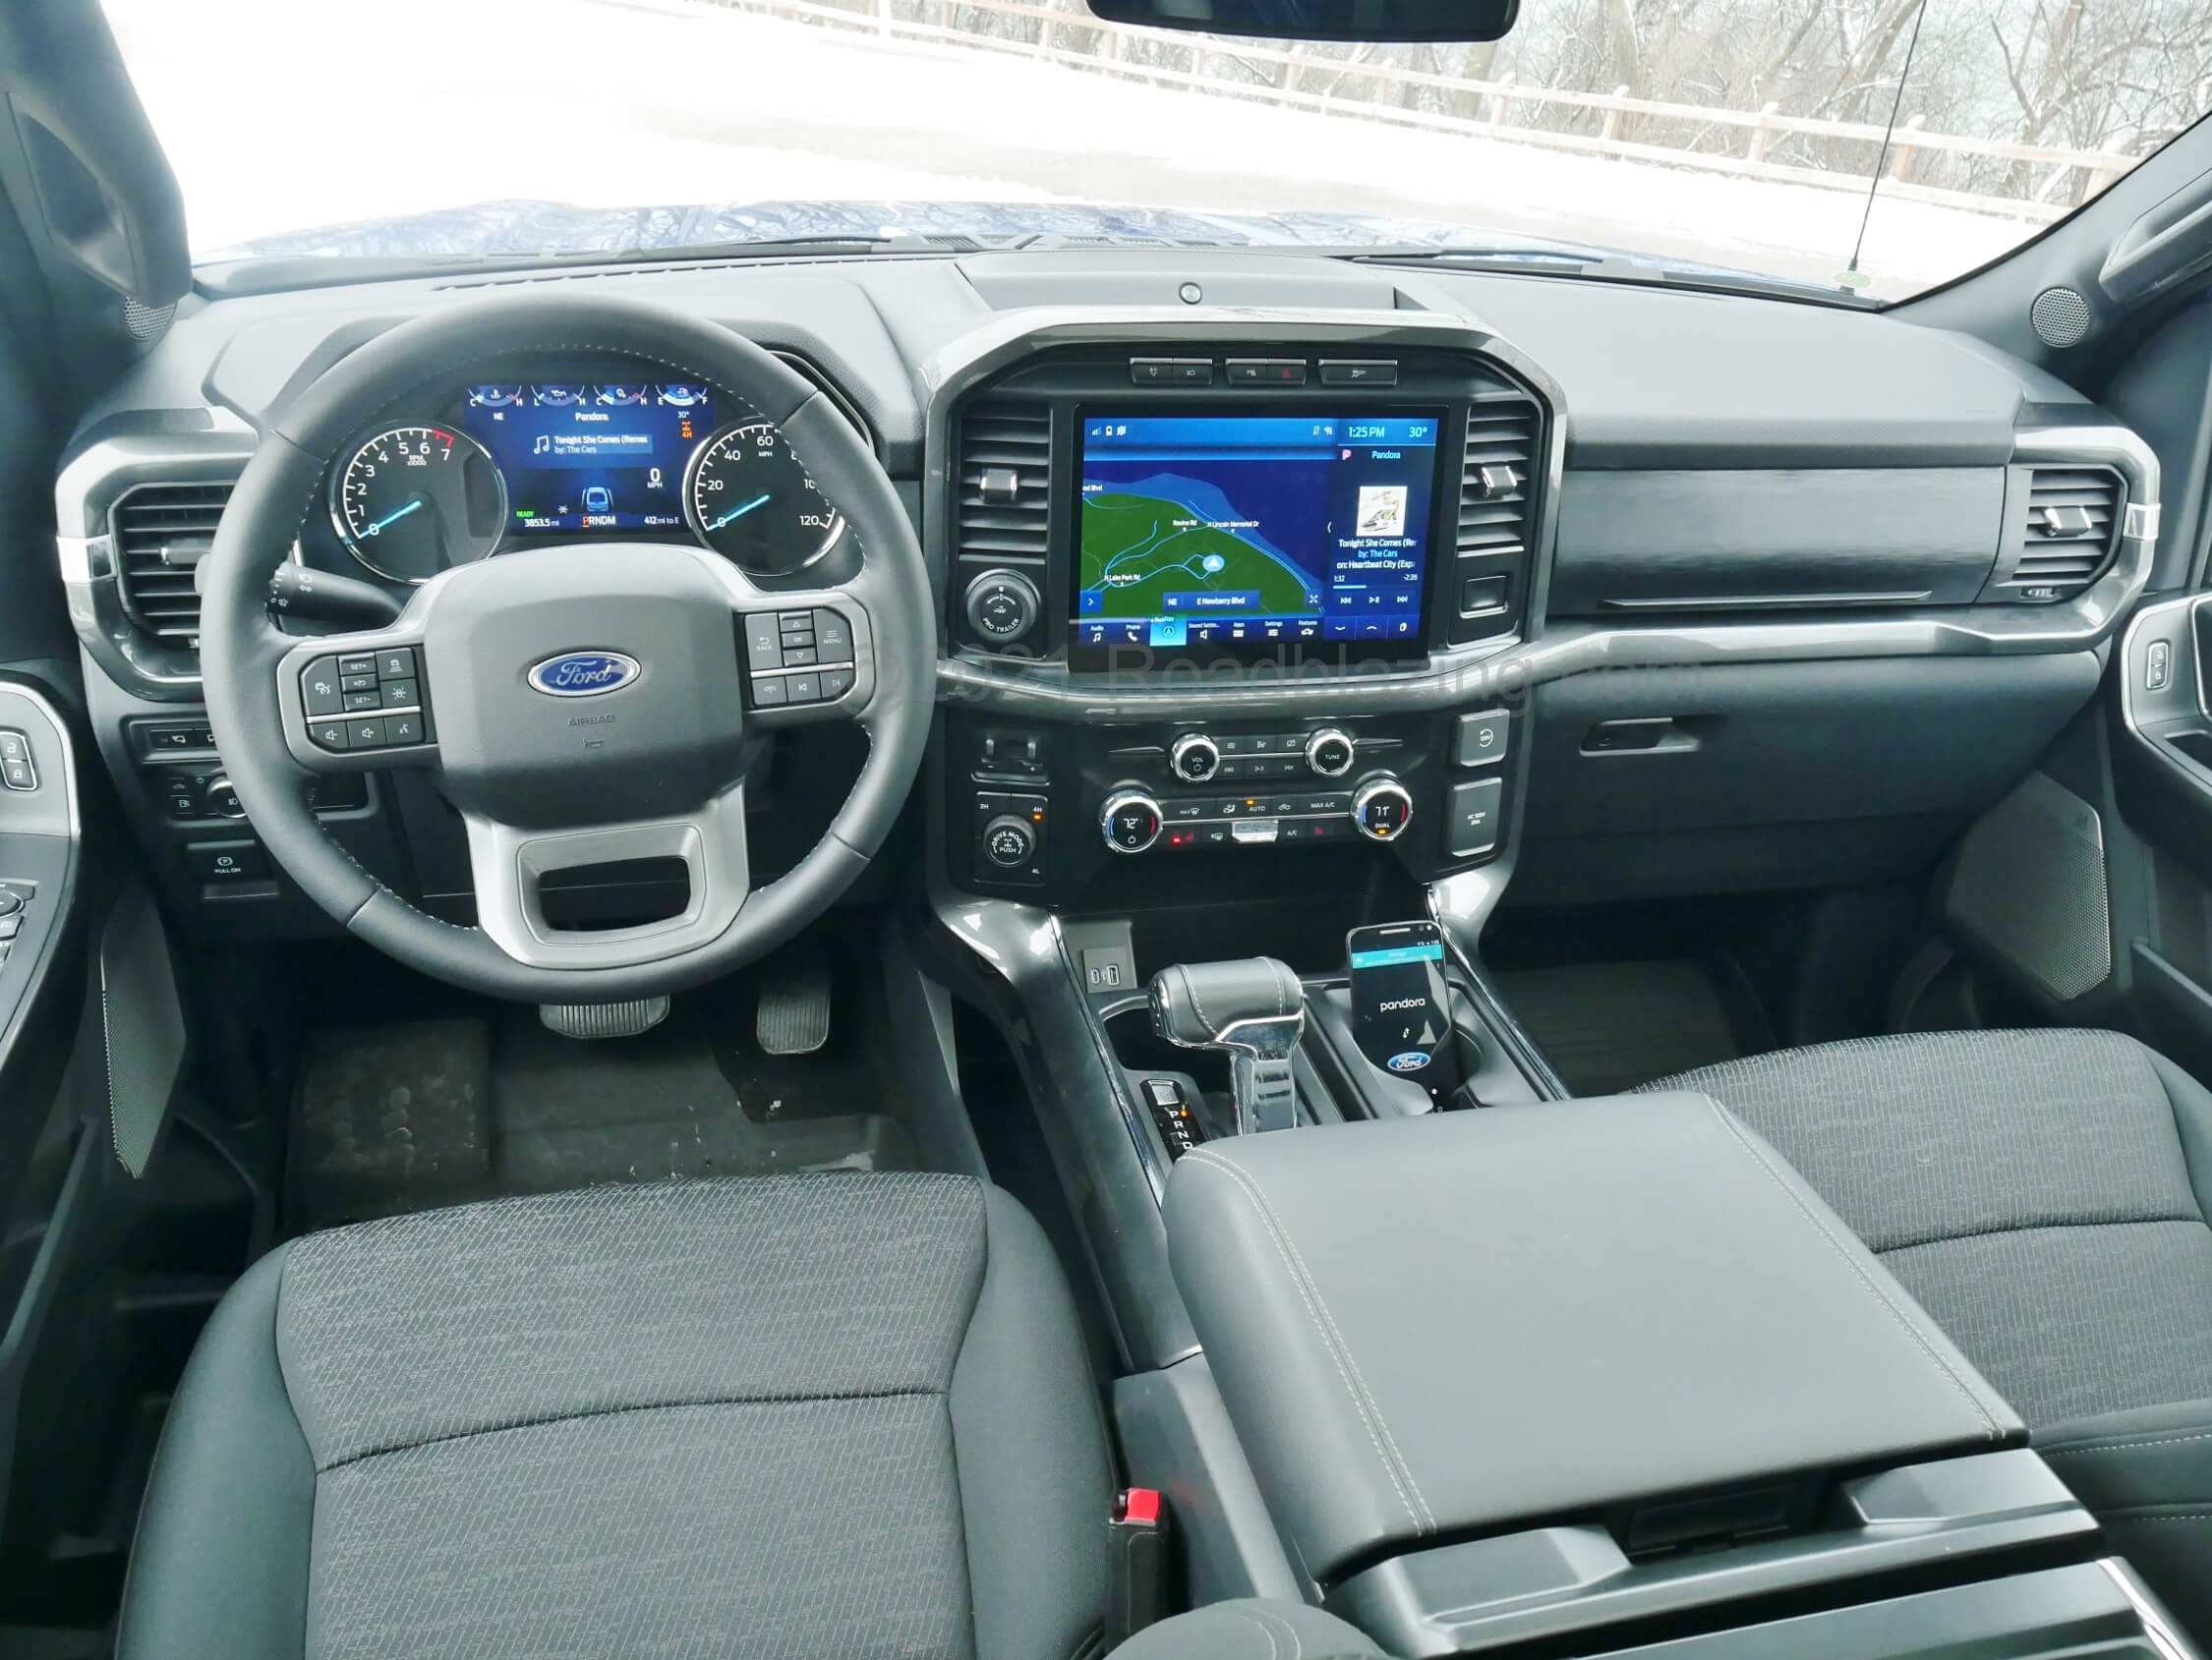 2021 Ford F-150 Supercrew XLT 4x4 PowerBoost hybrid: modern hi-tech pickup cockpit dominated by large TFT gauge cluster and 12.0" landscape touch to swipe LCD infotainment screen